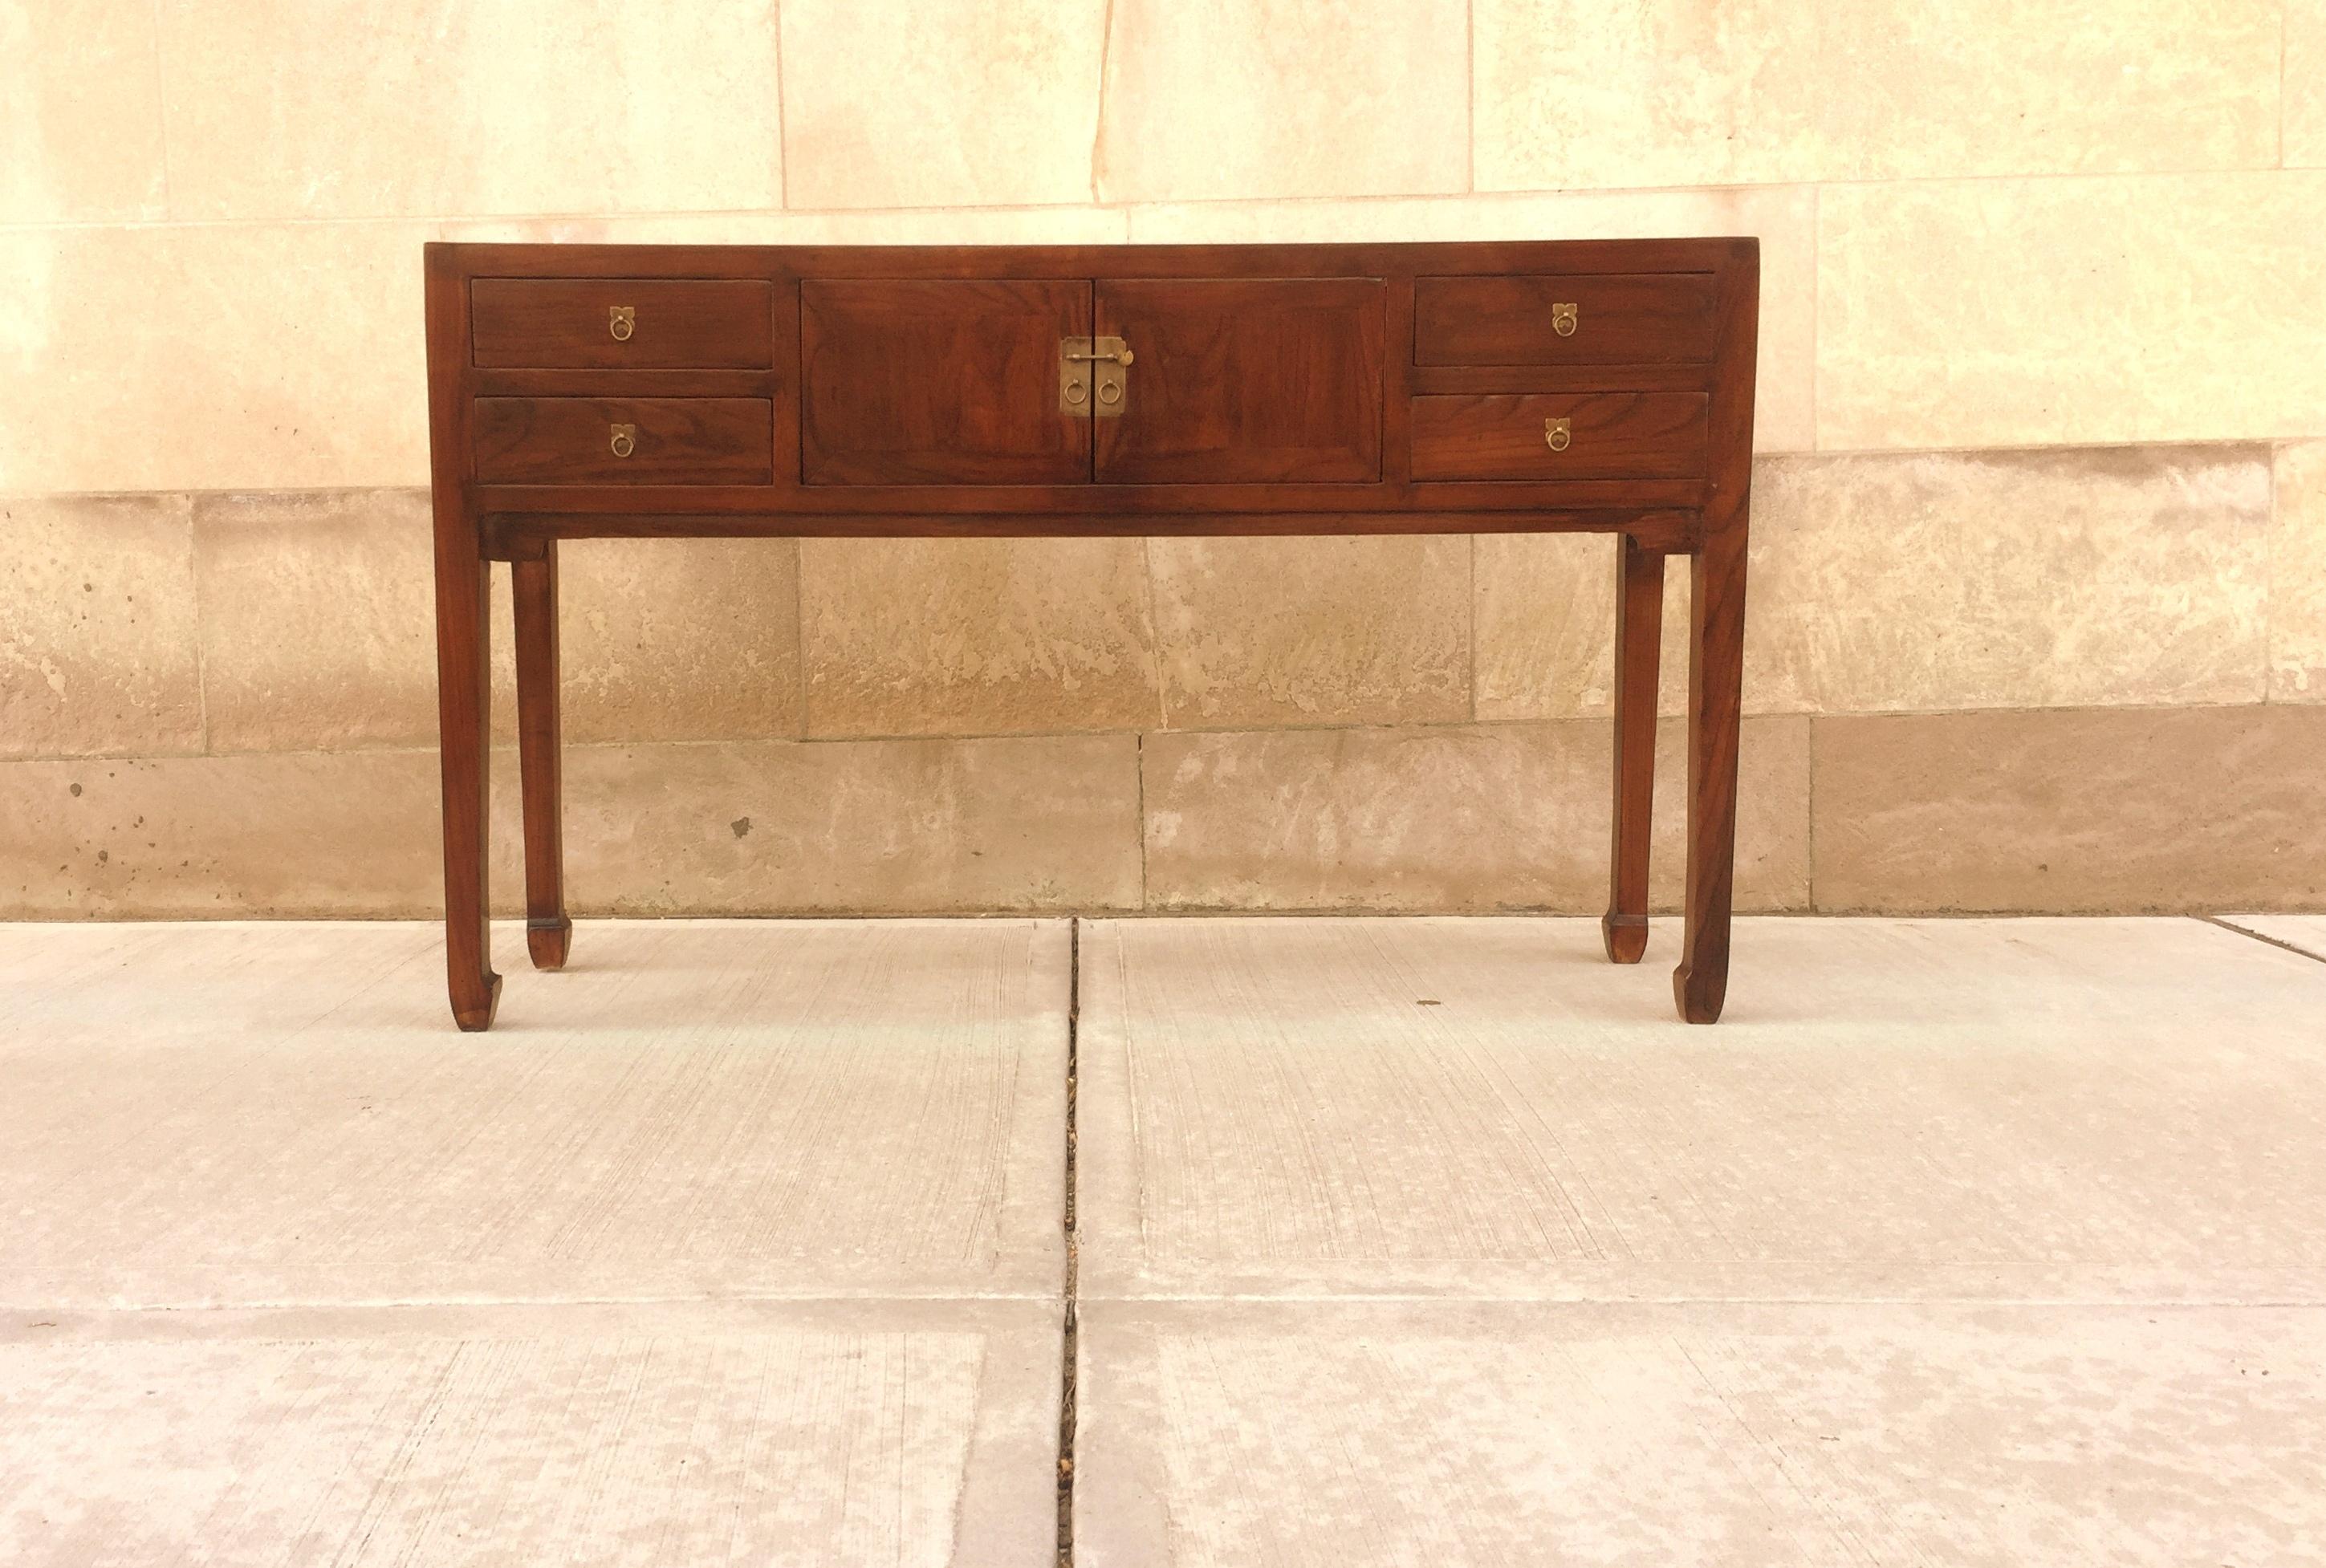 Fine Jumu console table with four drawers and pair of doors. Very elegant and fine quality. Beautiful color and simple form. We carry fine quality furniture with elegant finished and has been appeared many times in 